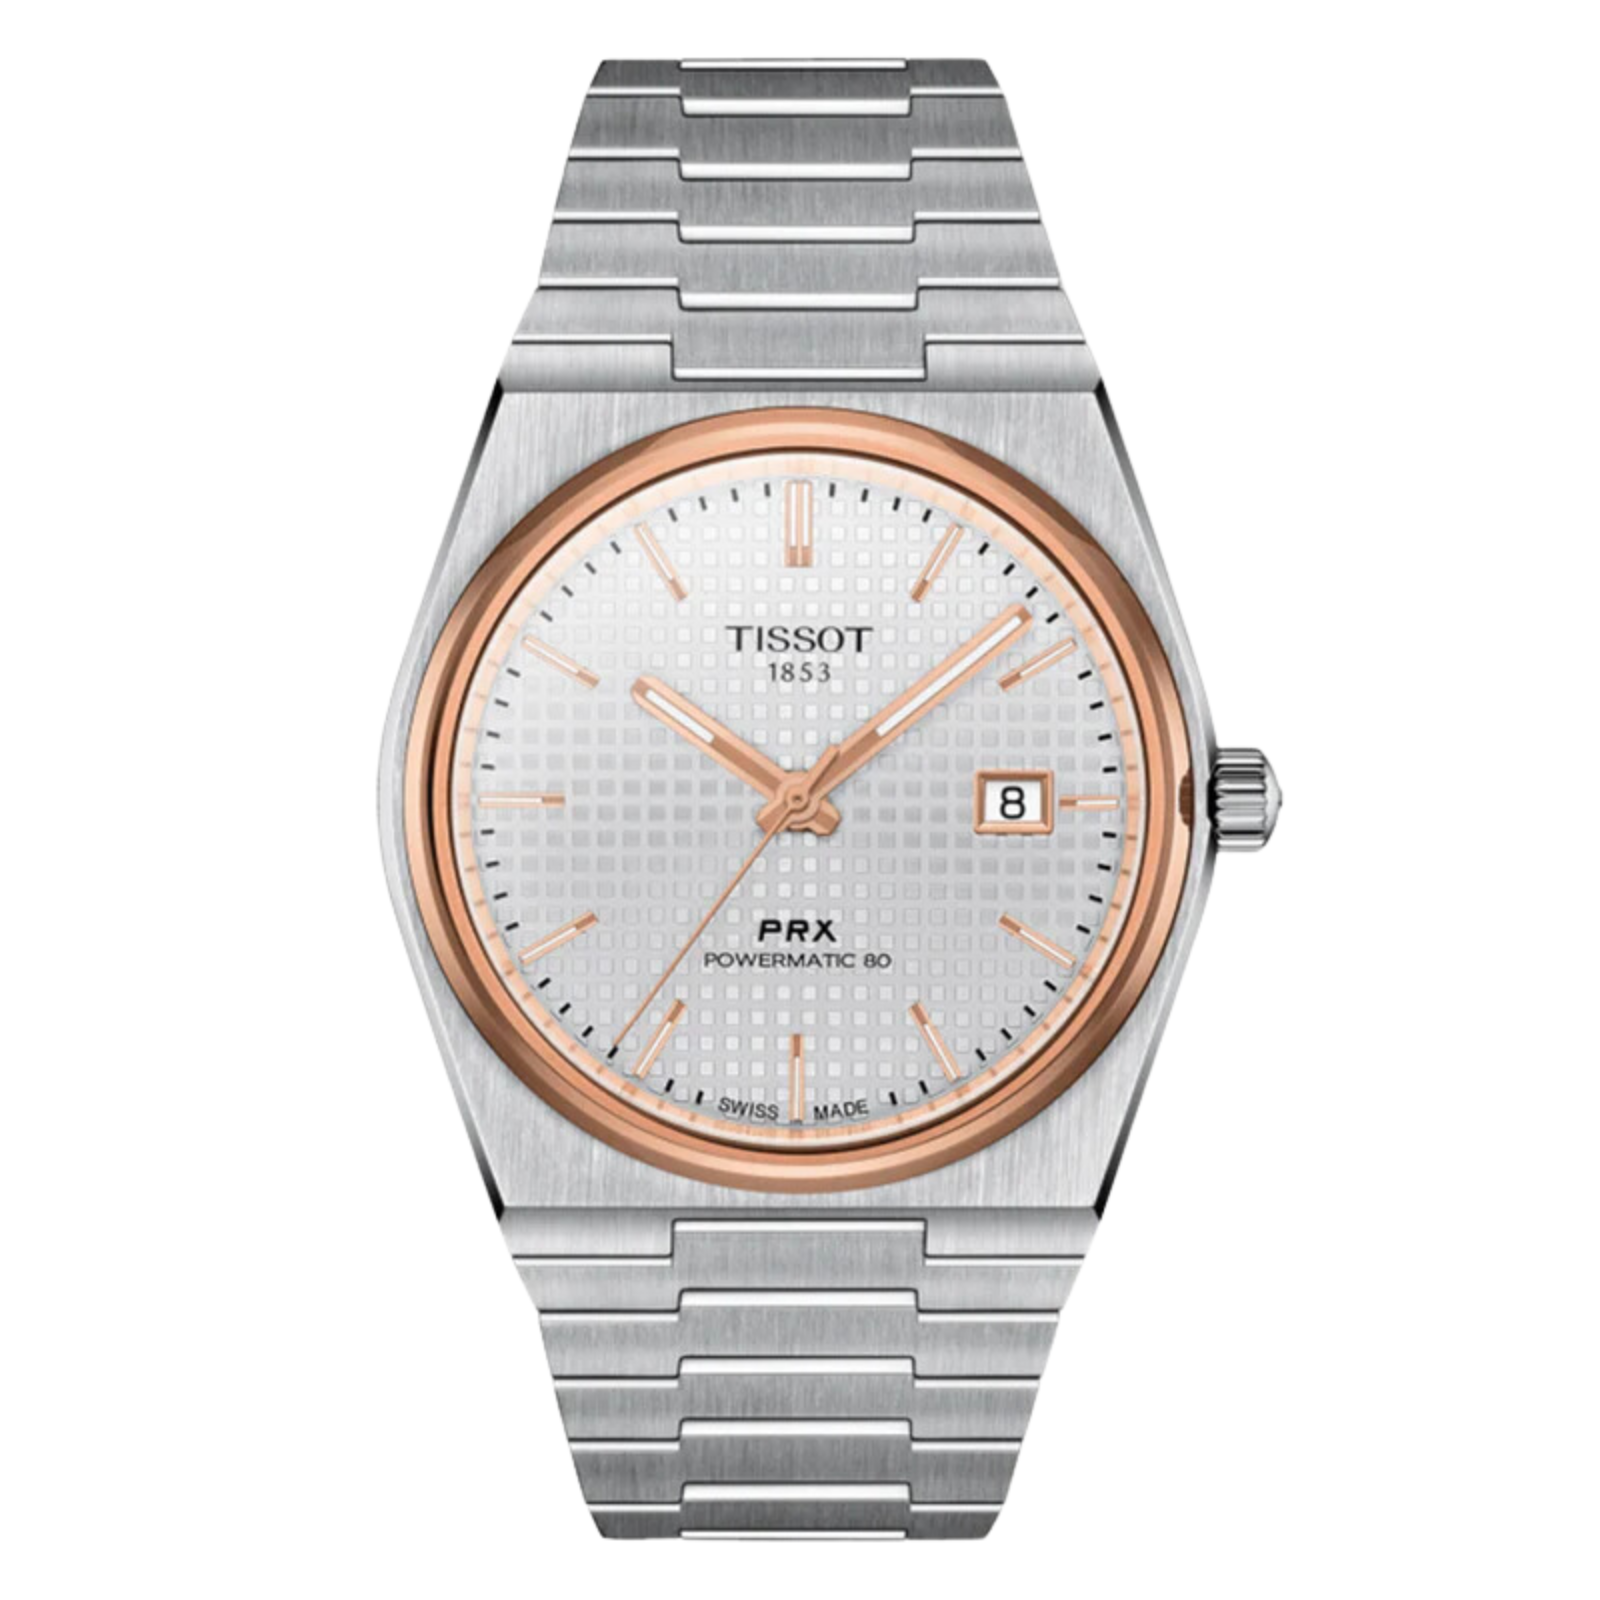 Tissot 1853 PRX Powermatic 80 T137.407.21.031.00 T1374072103100 Silver Dial Watch - Skywatches